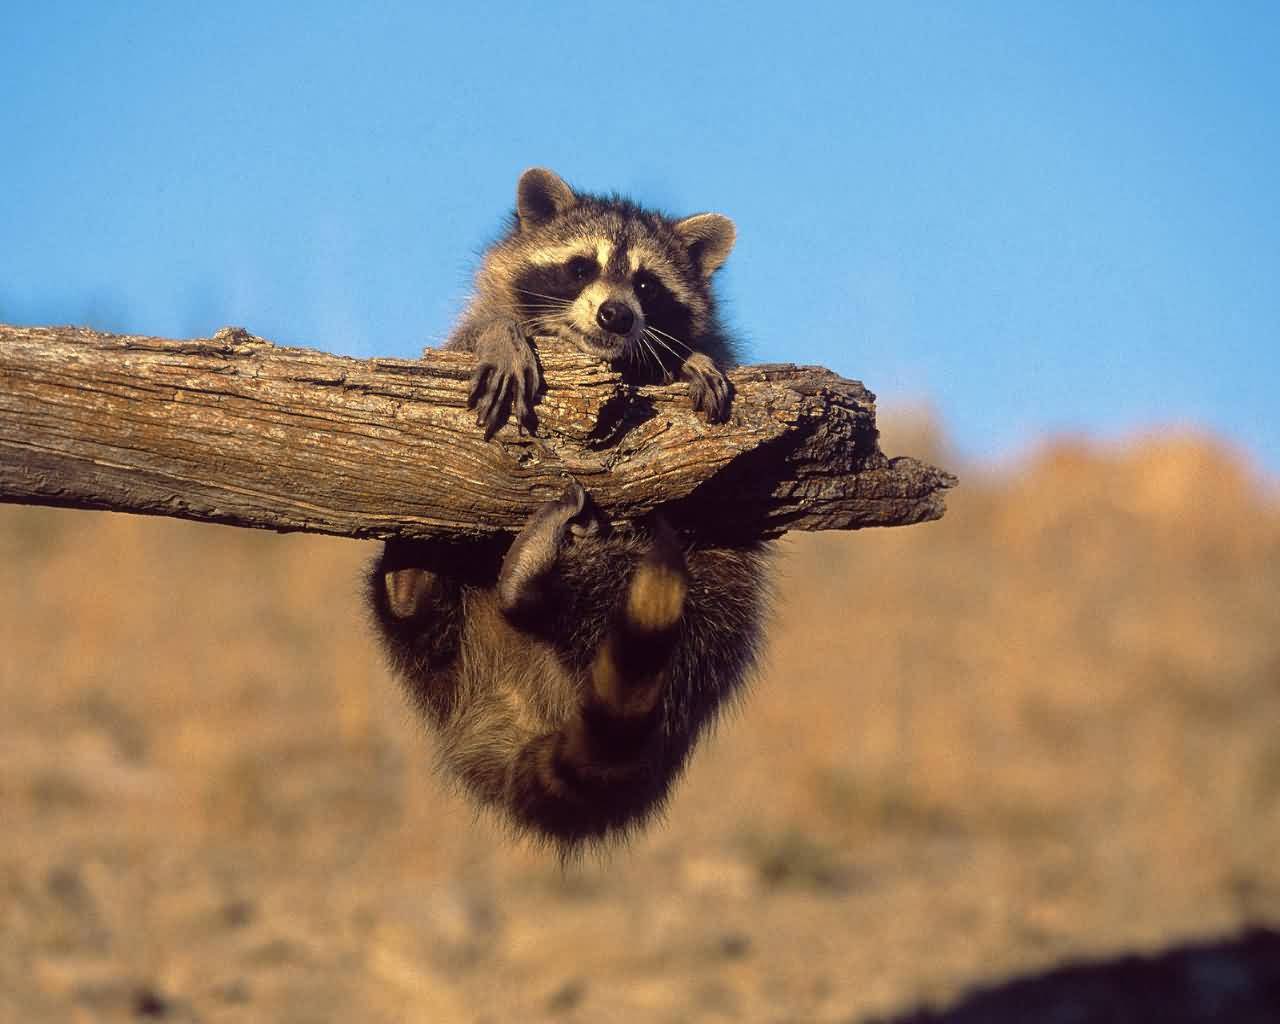 Little Raccoon In Forest Arwork Wallpapers